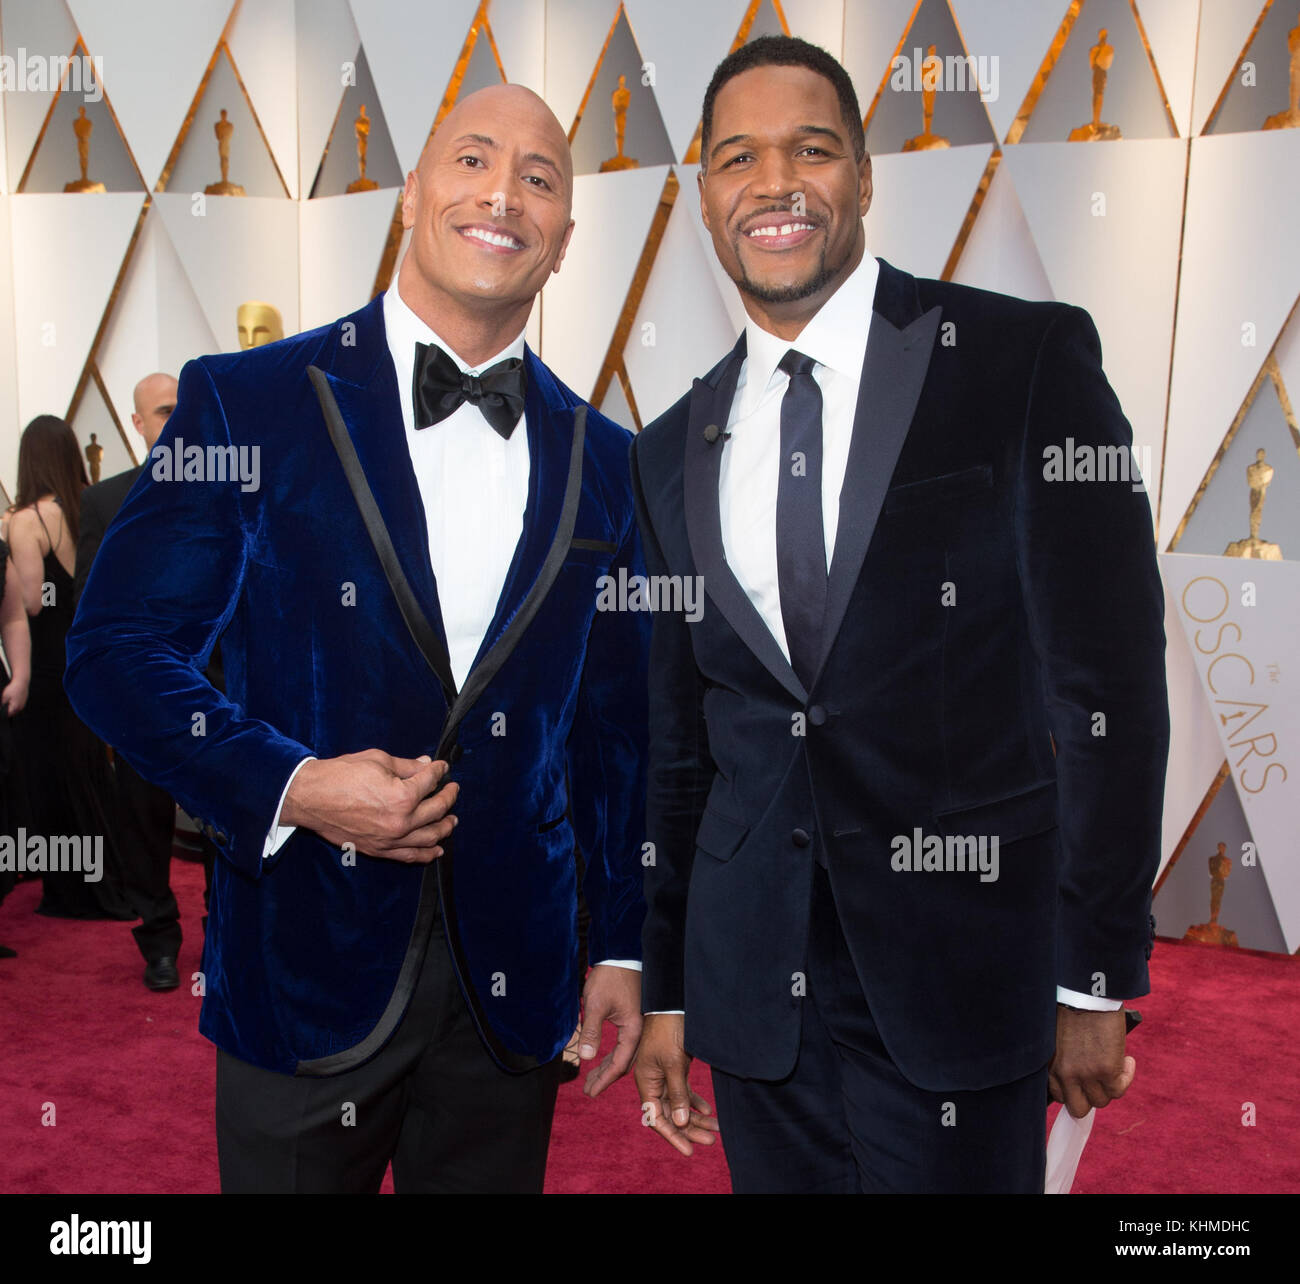 HOLLYWOOD, CA - FEBRUARY 26: Dwayne Johnson and Michael Strahan attends the 89th Annual Academy Awards at Hollywood & Highland Center on February 26, 2017 in Hollywood, California  People:  Dwayne Johnson and Michael Strahan  Transmission Ref:  MNC Stock Photo